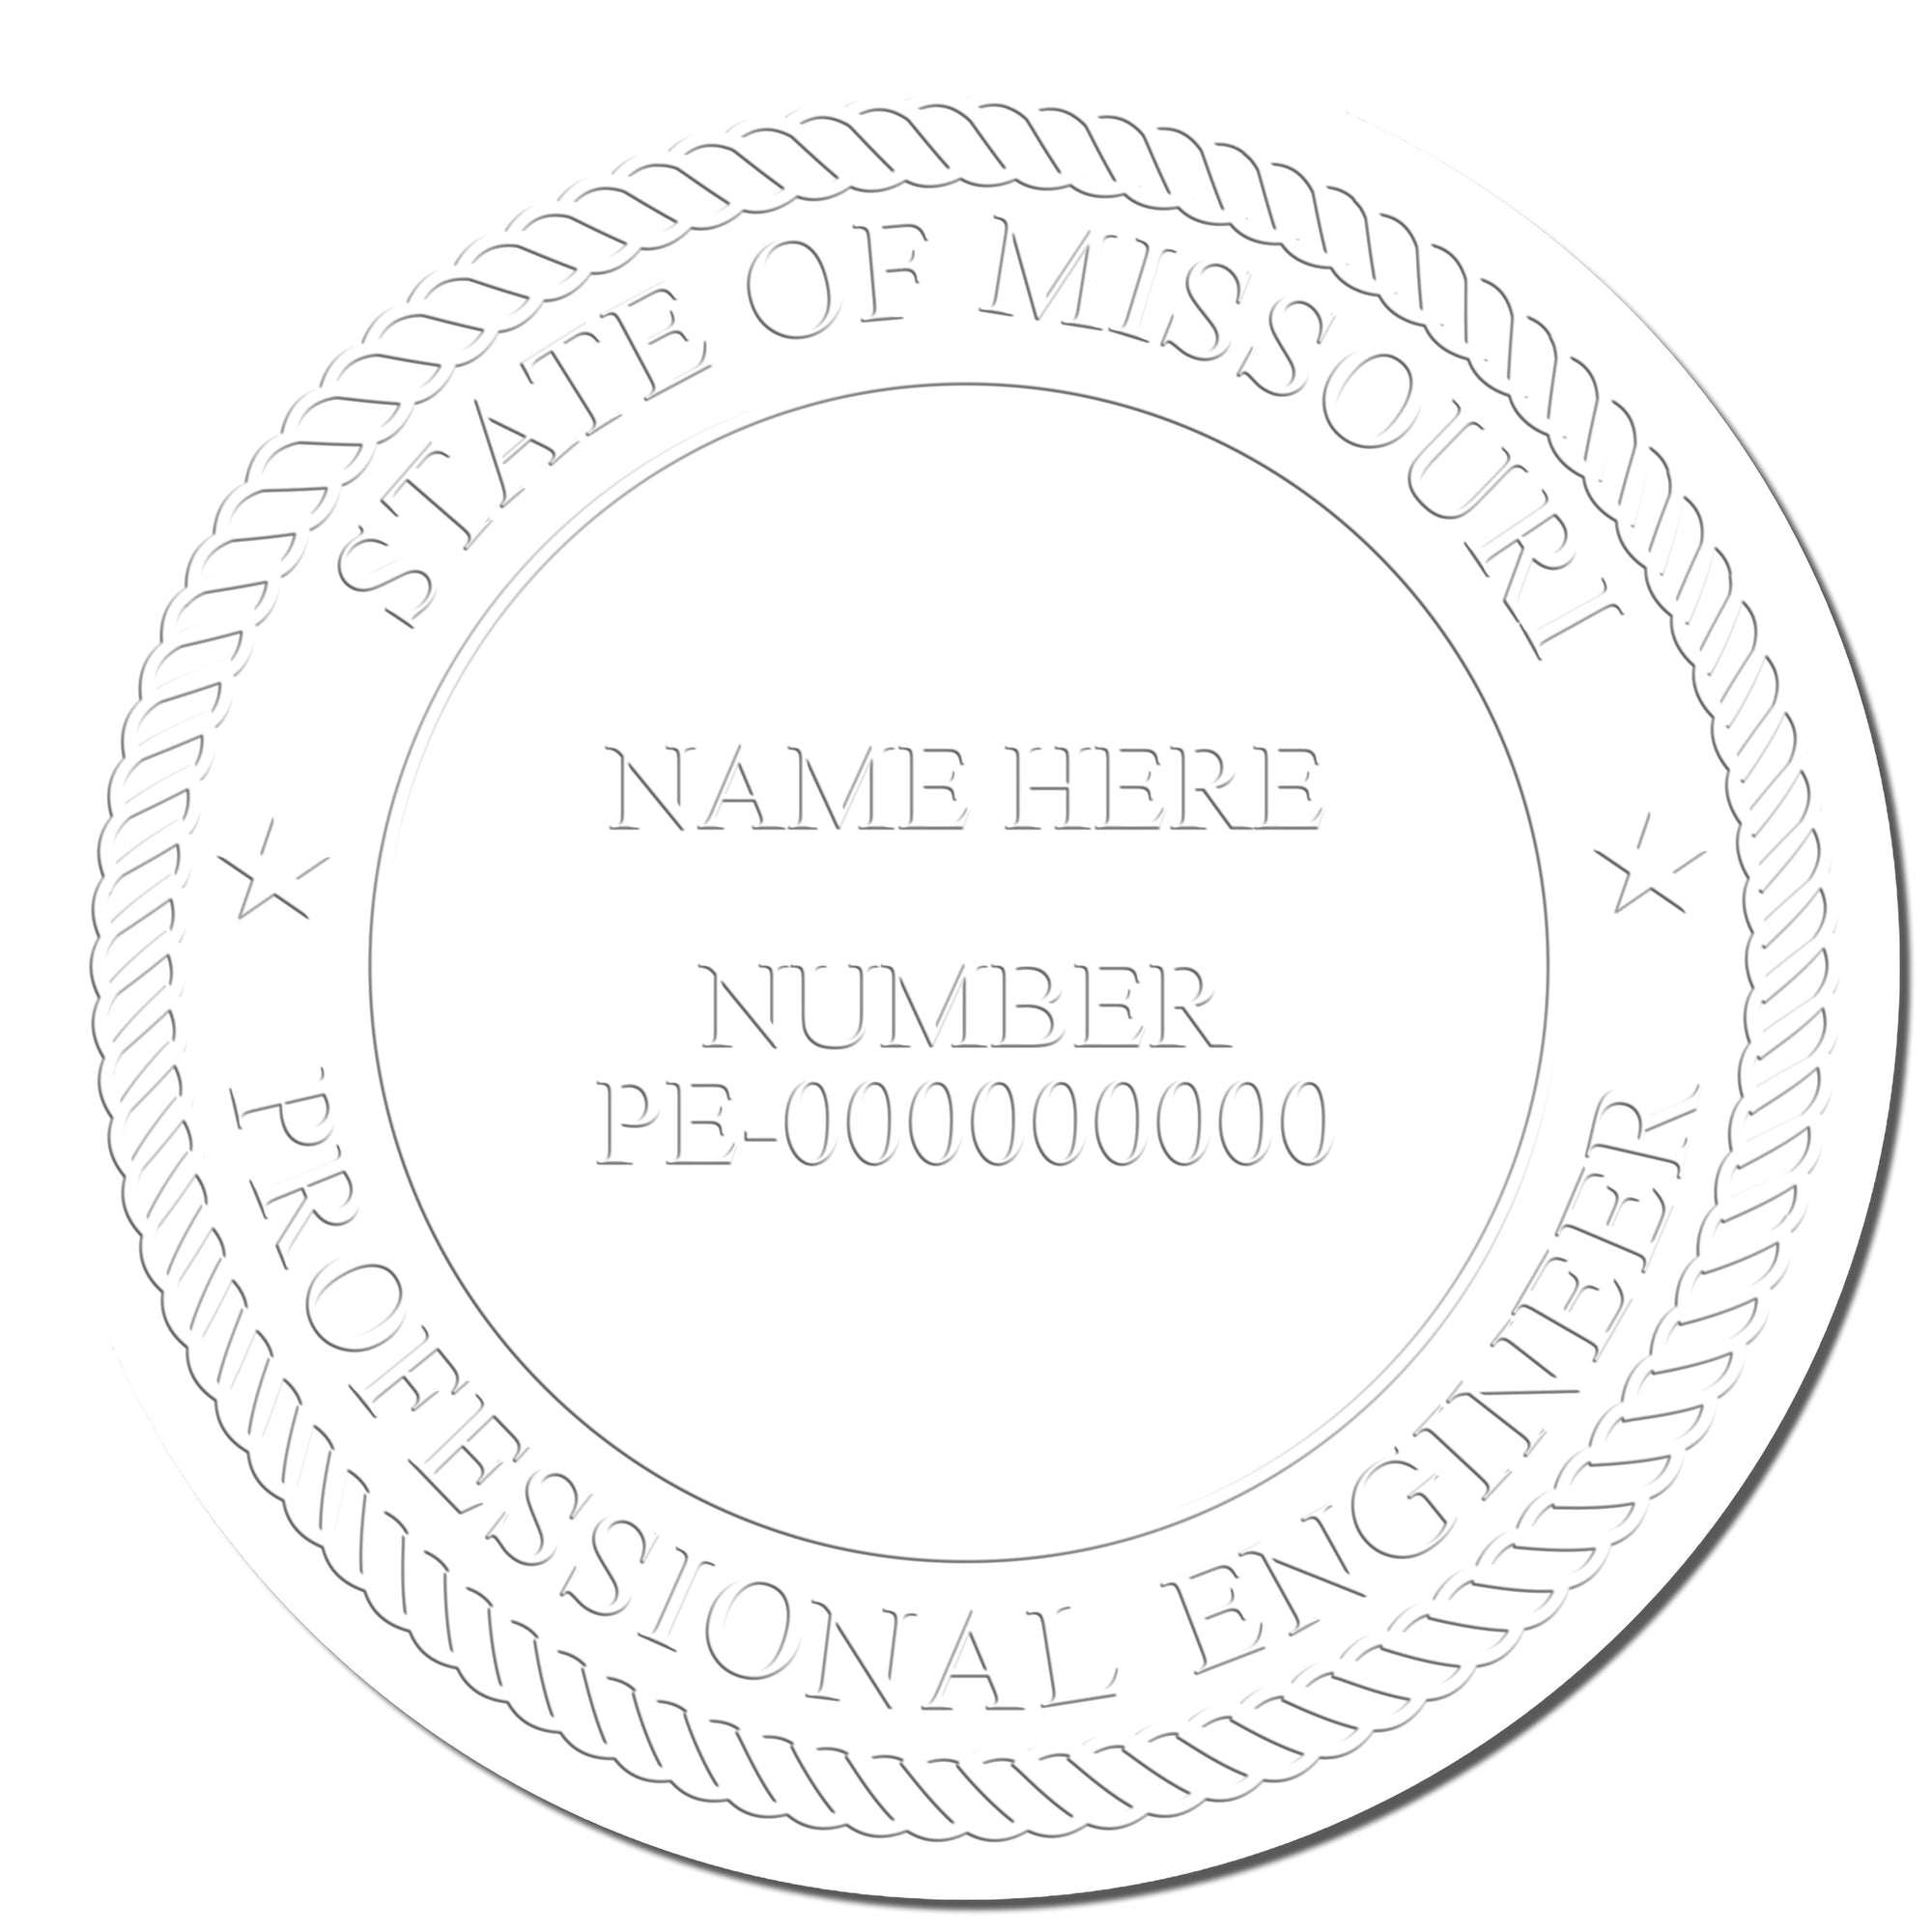 The main image for the Missouri Engineer Desk Seal depicting a sample of the imprint and electronic files